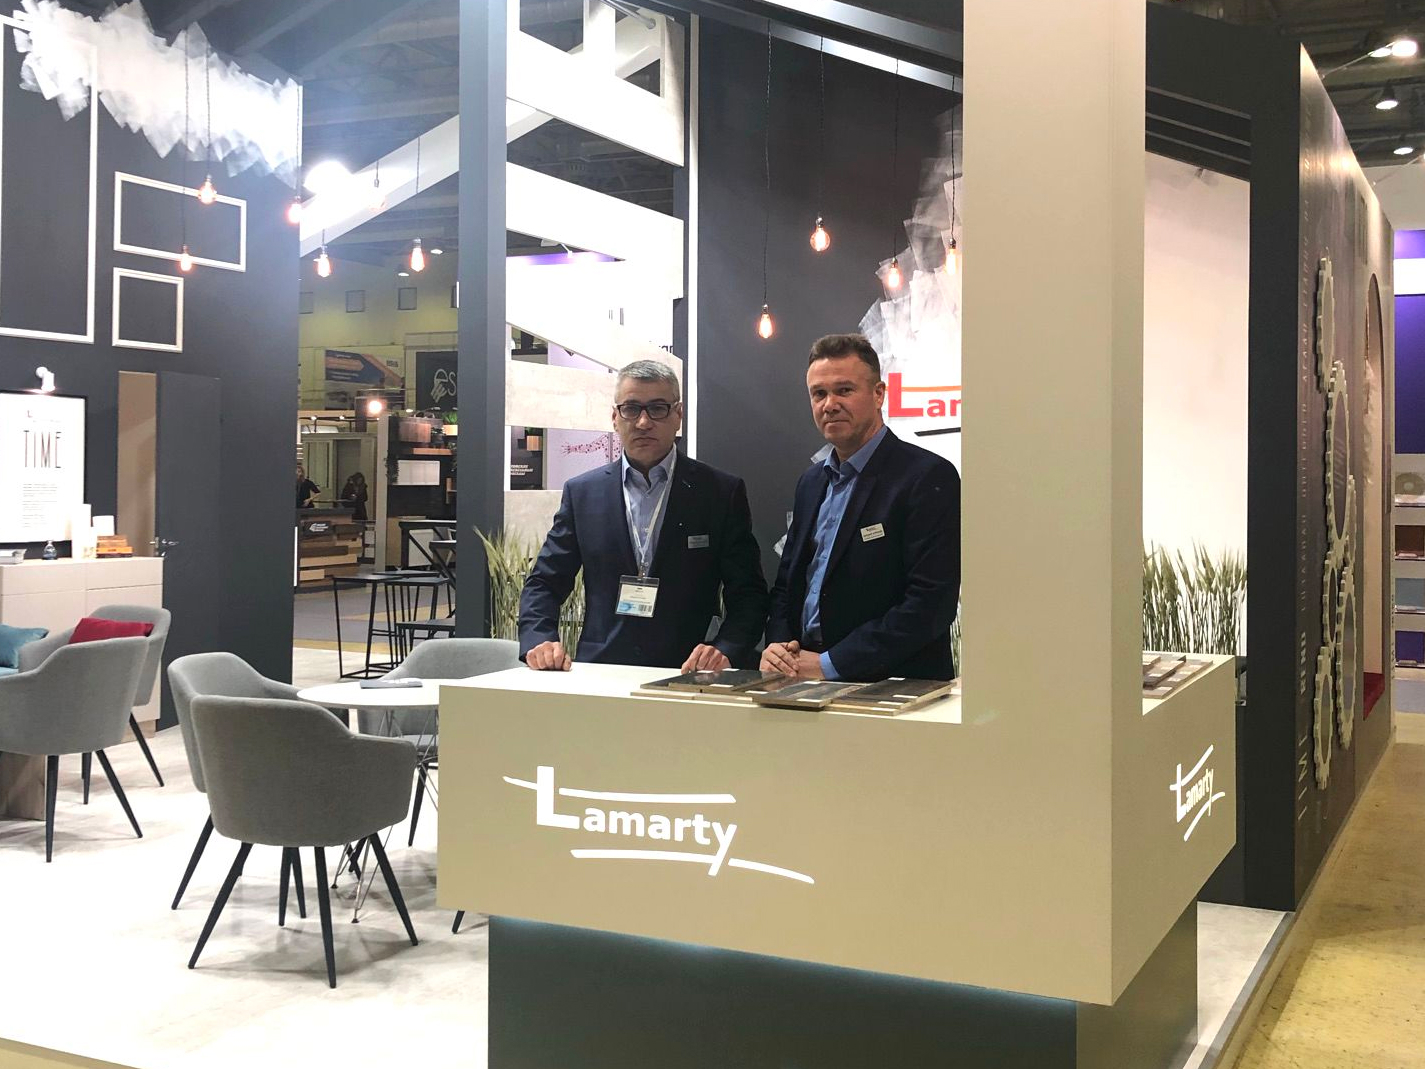 Lamarty at the Mebel-2021 exhibition